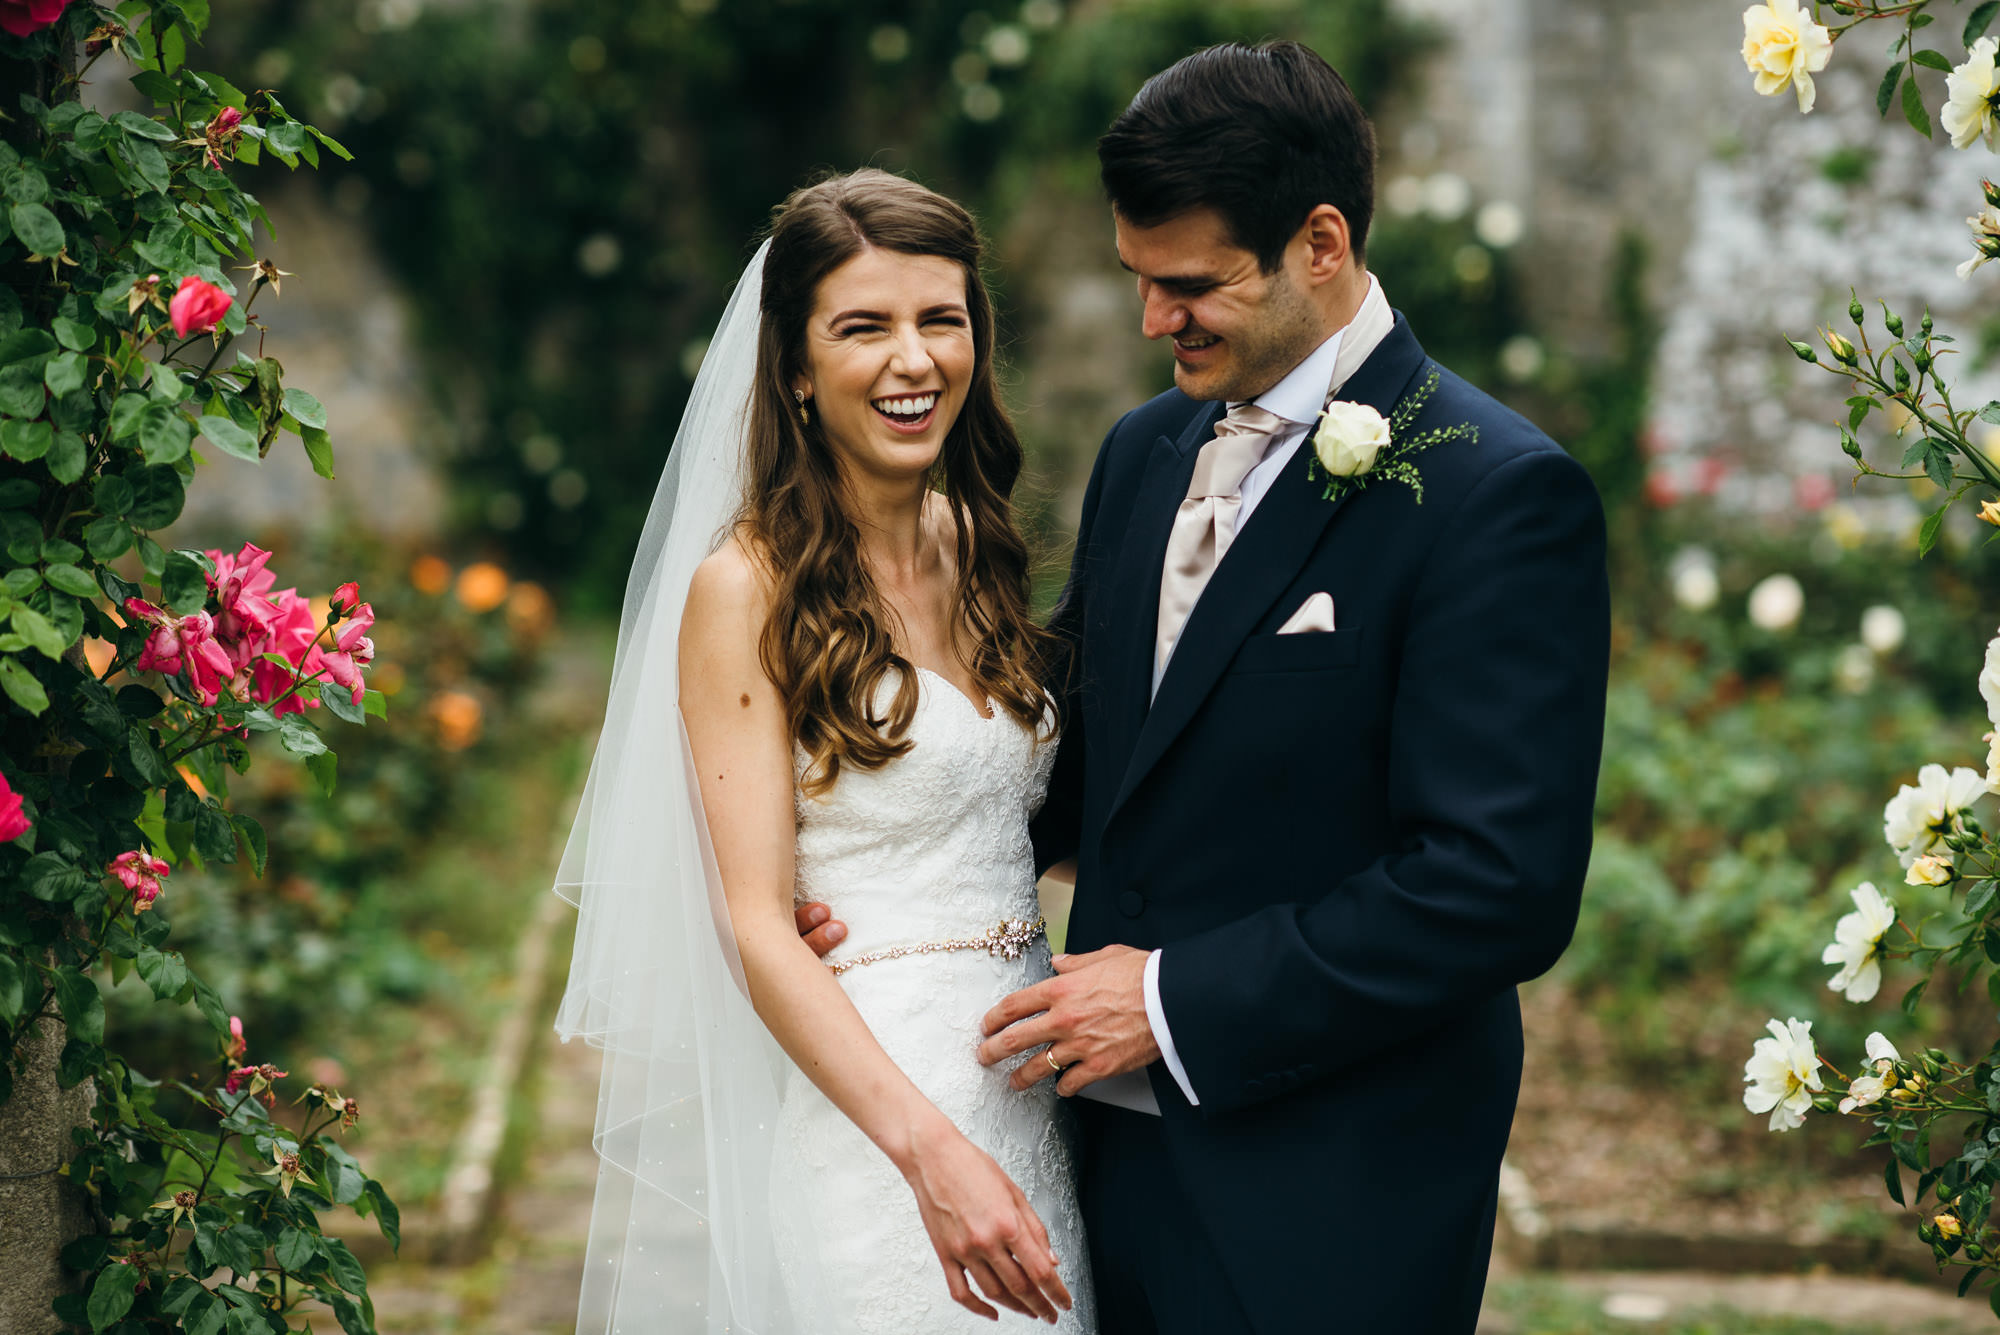 Bride and groom at St donats castle Rose Garden